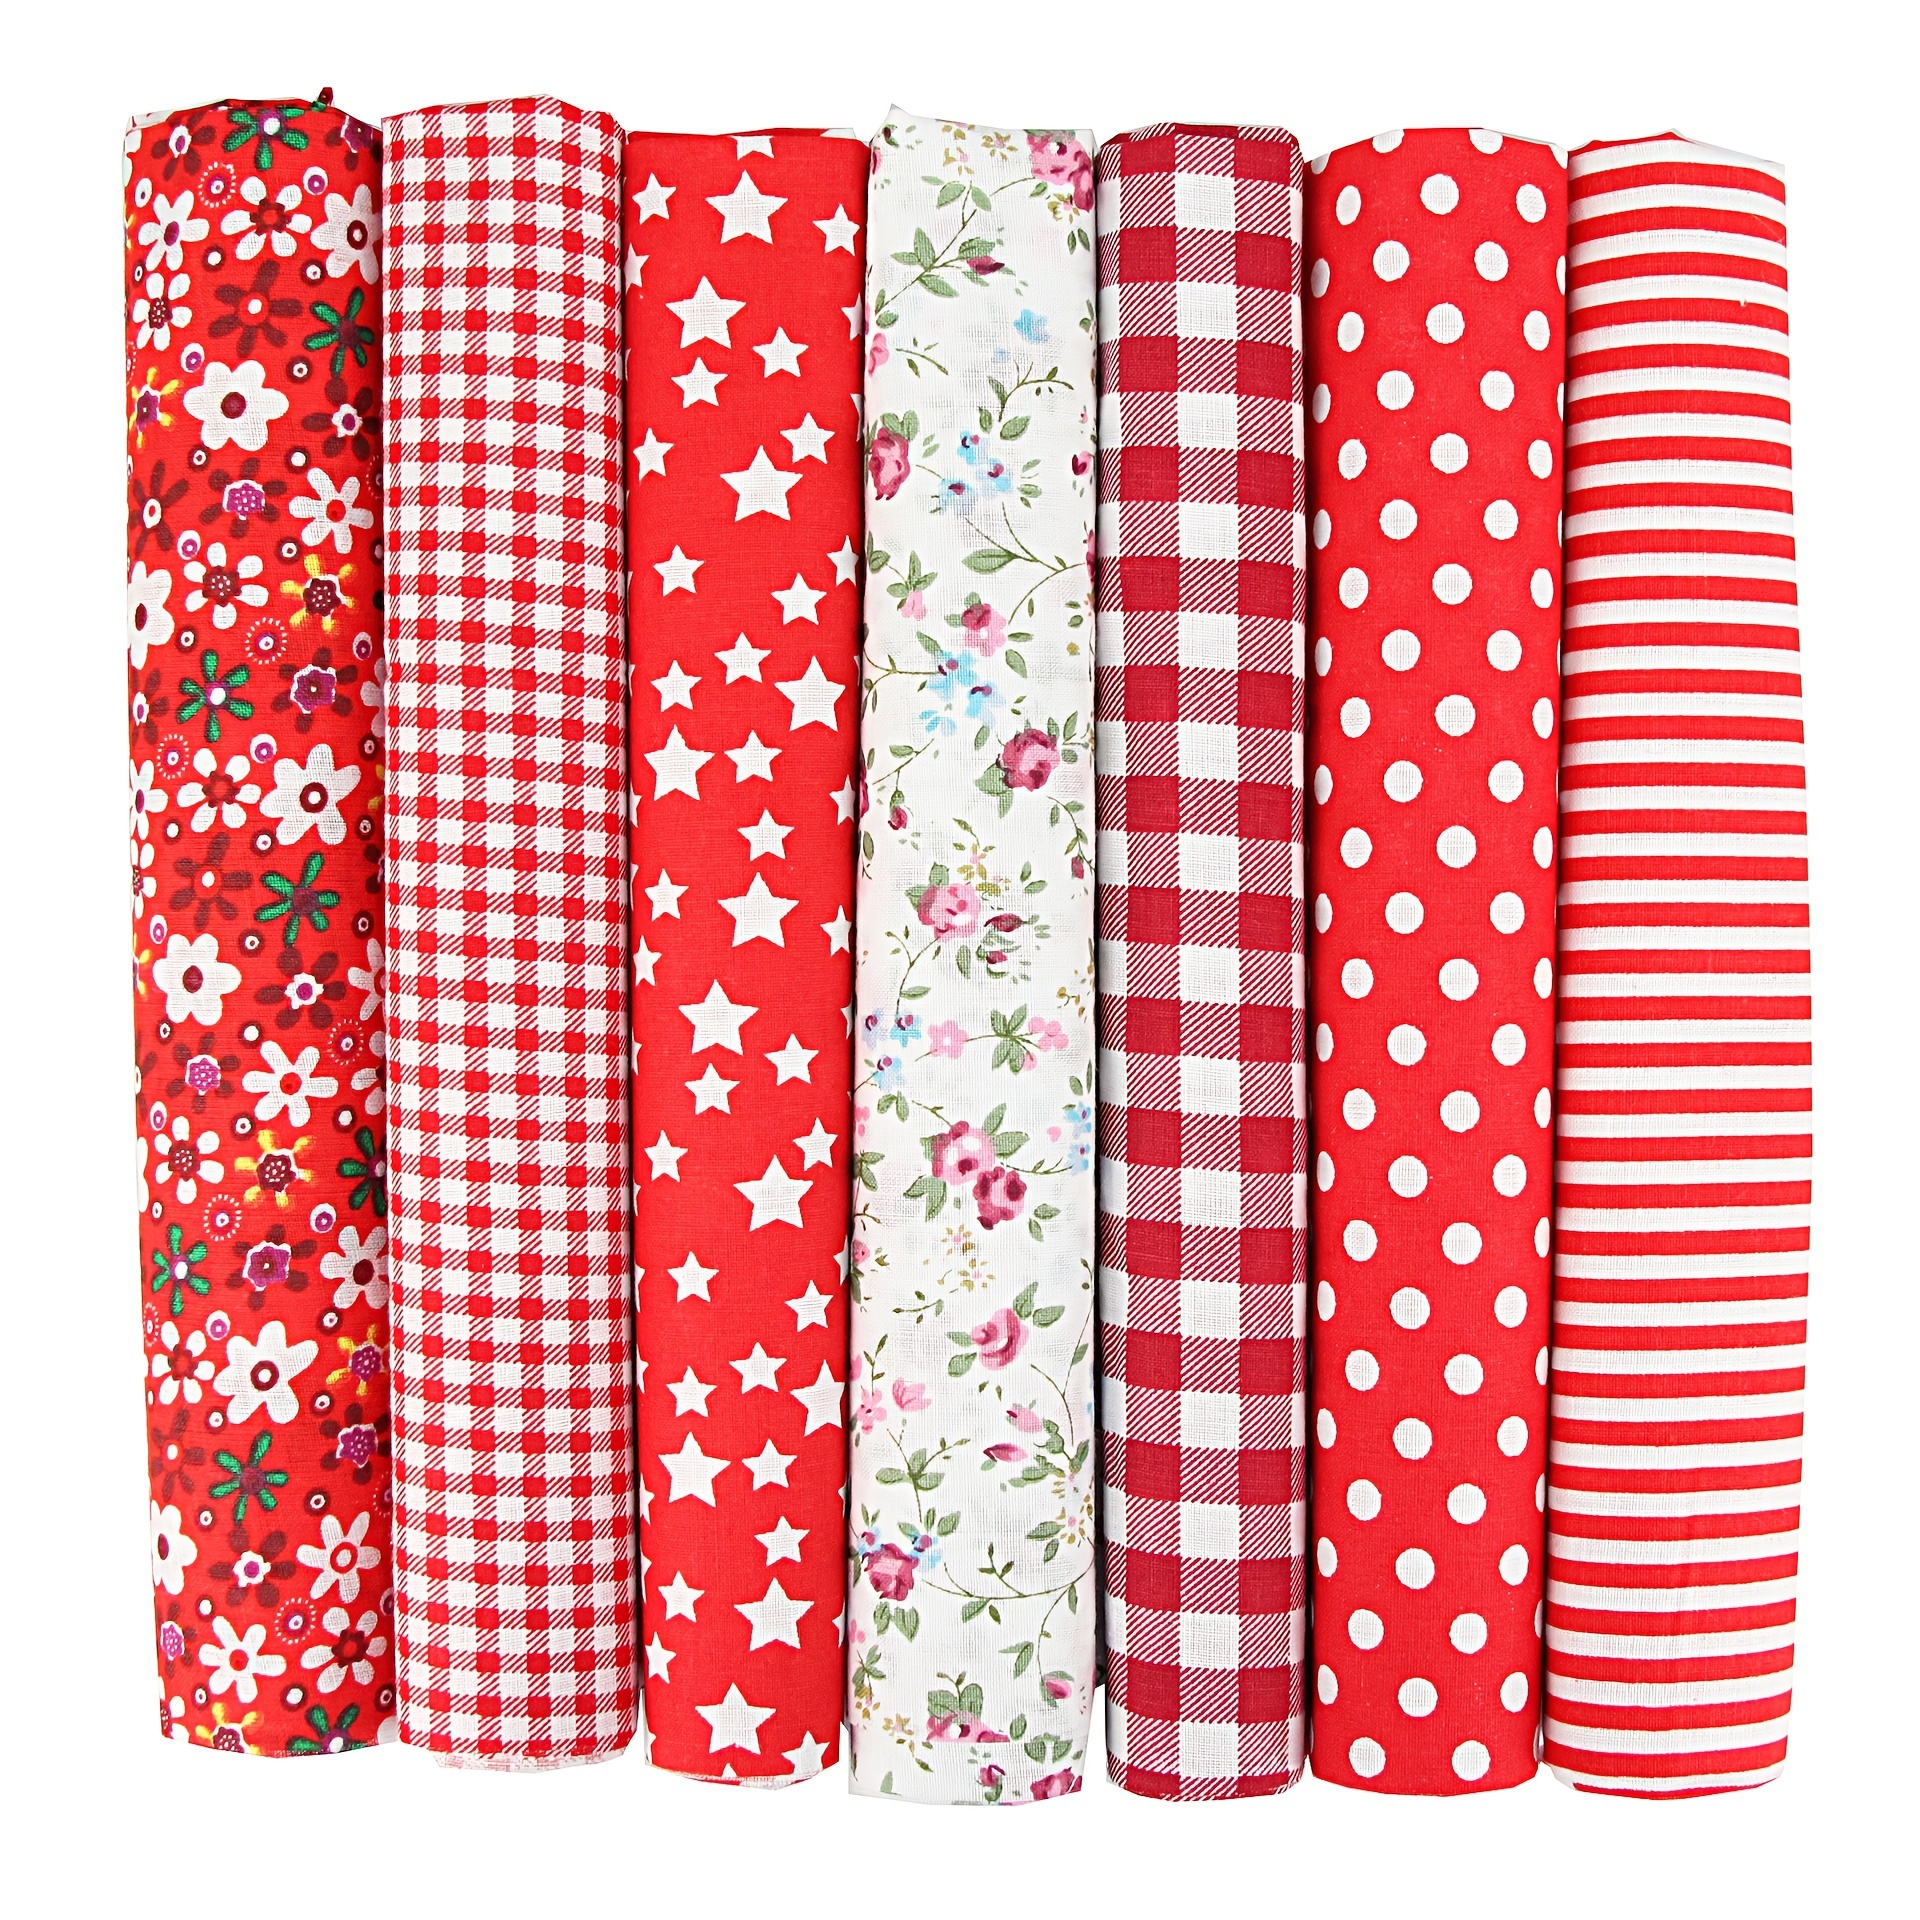 

7pcs 9.8"x 9.8" 25cm*25cm Handmade Cotton Fabric, 100% Floral Printed Sewing Supplies Fabric For Quilting Patchwork, Diy Sewing Stitching